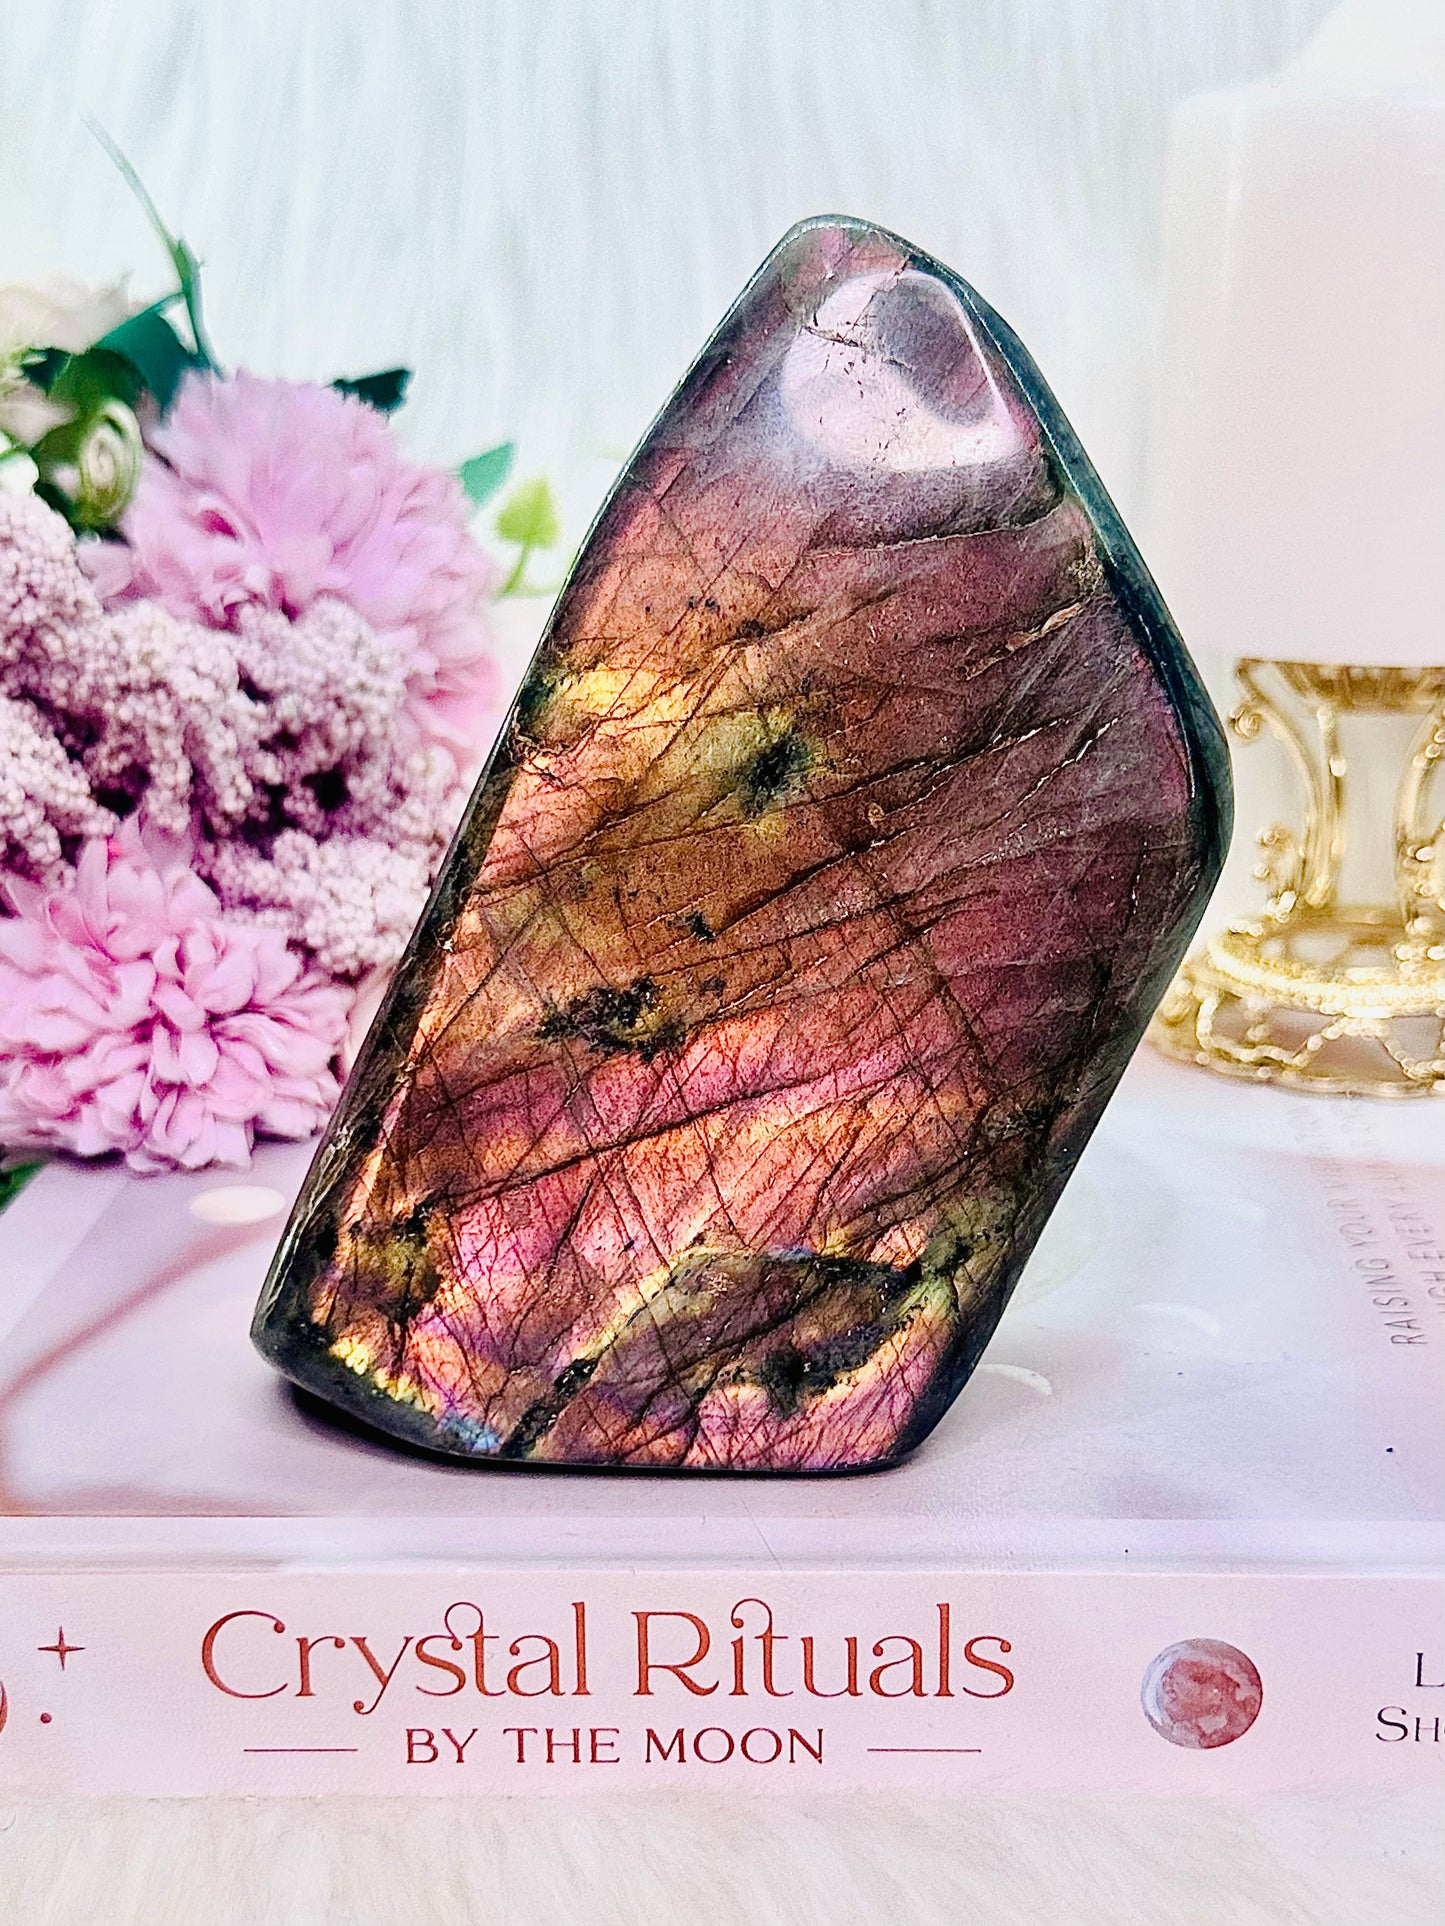 Wow!!!!!!! She Doesn’t Hide Her Flash!!!! Classy & Fabulous Large 742gram Labradorite Polished Freeform with Spectacular Pink Orange & Yellow Flash ~ Truly Divine Piece